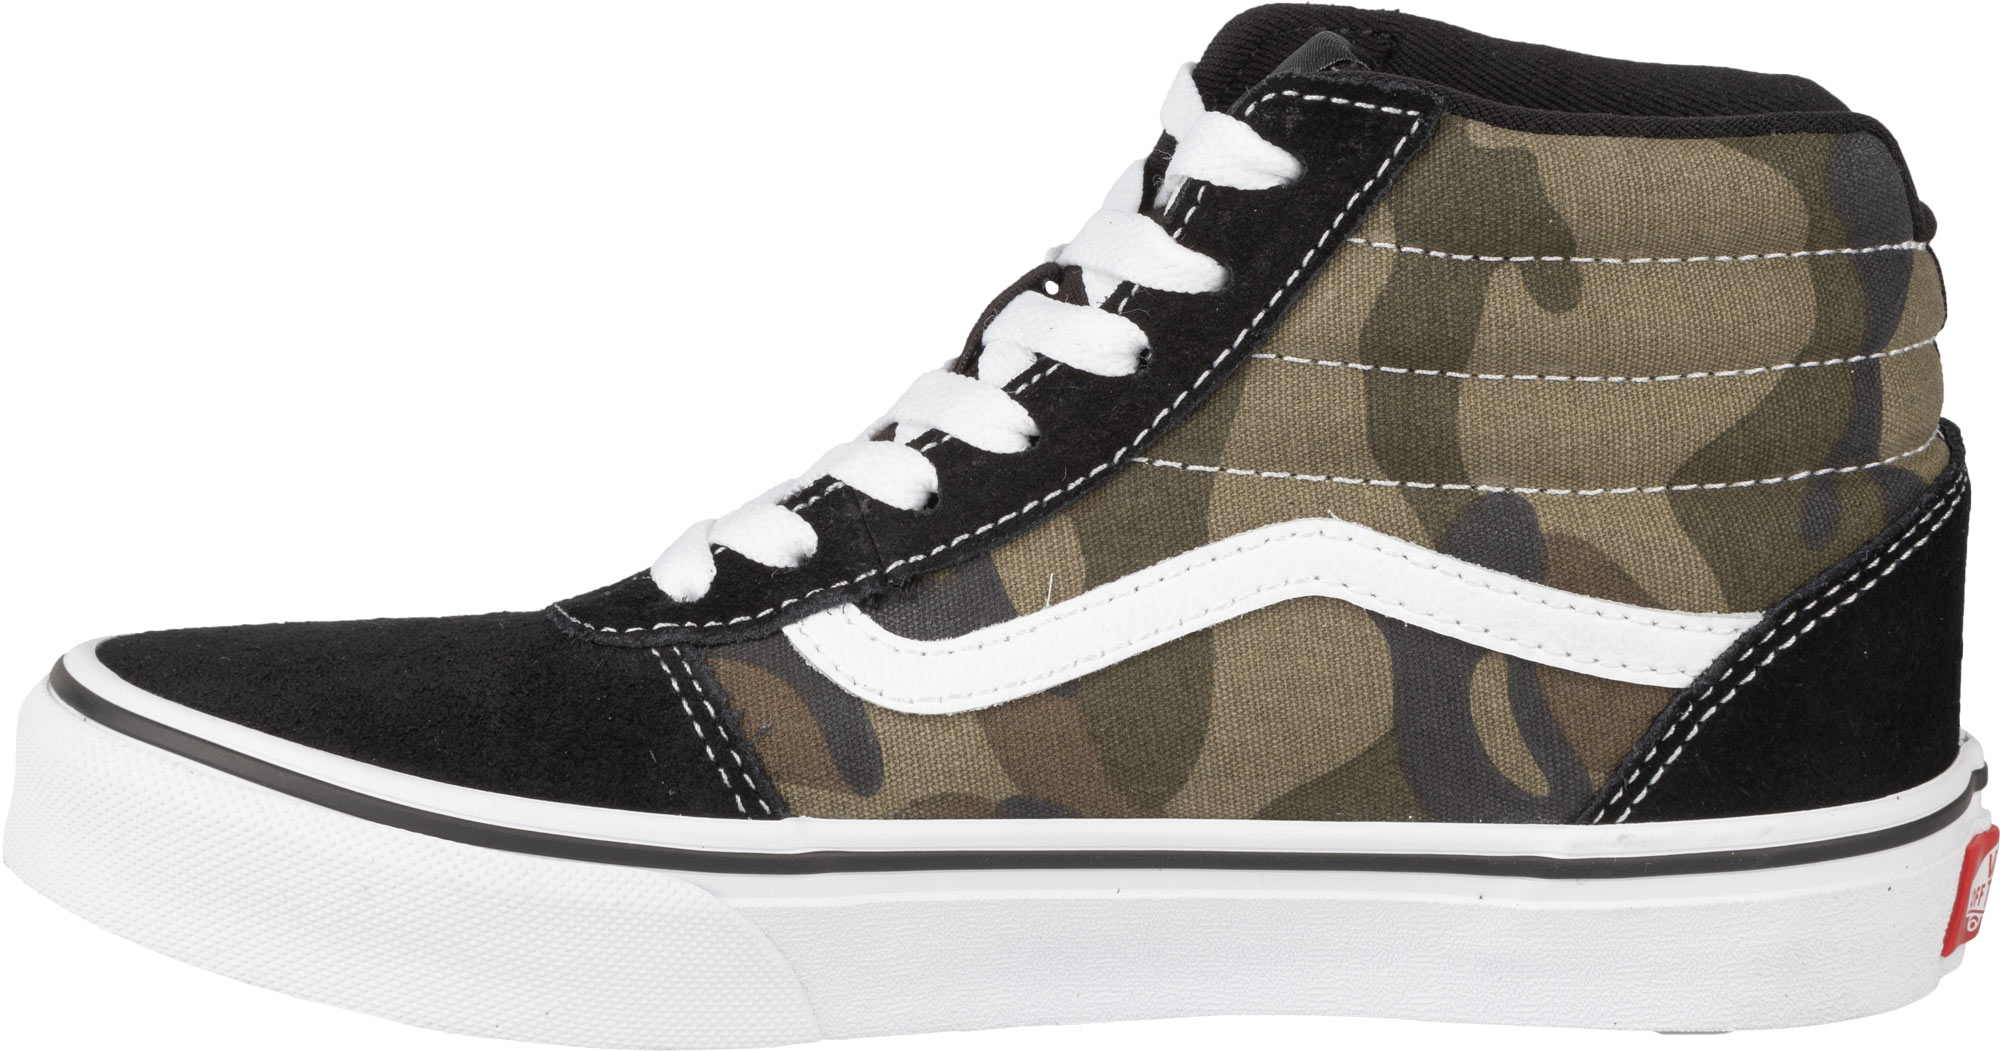 Boys’ ankle sneakers